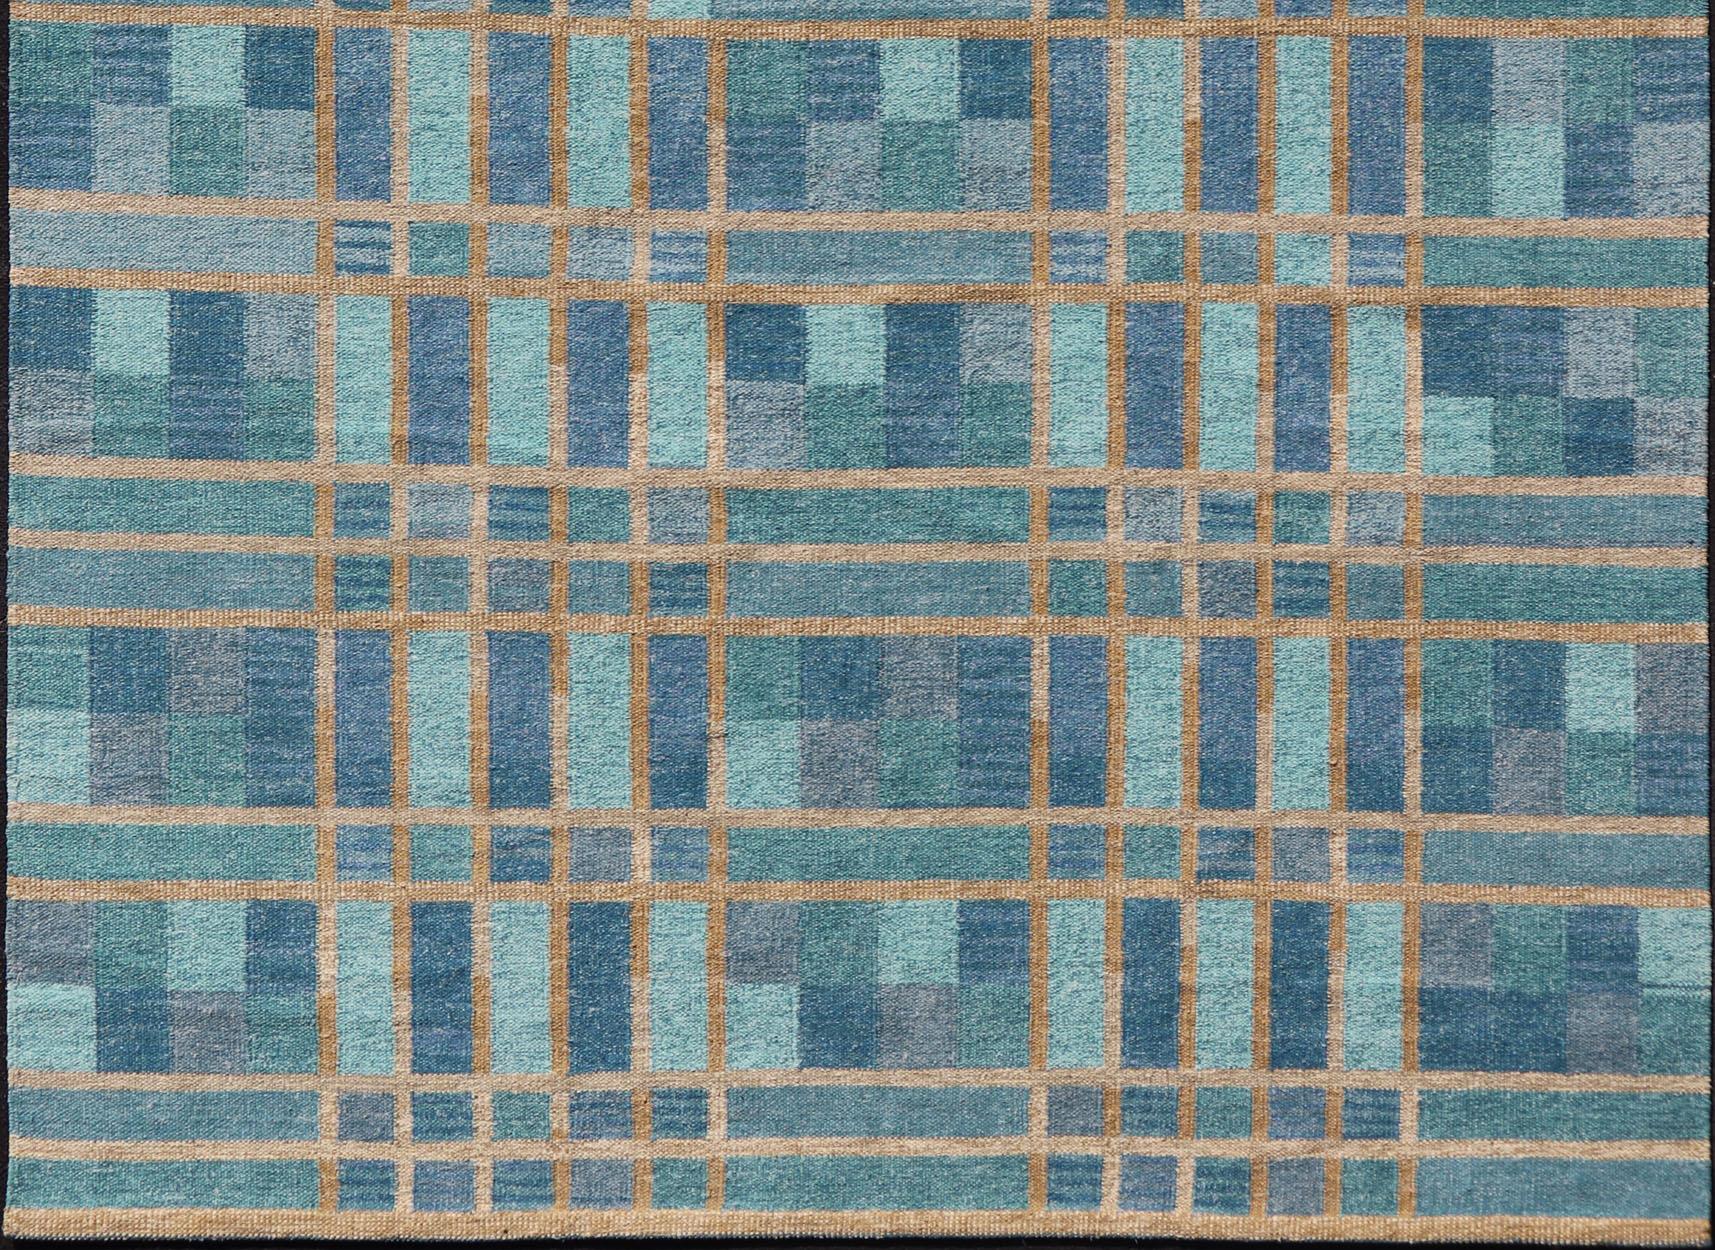 Indian Large Scandinavian Inspired Design Rug in Blue, Teal, Green, and Gold